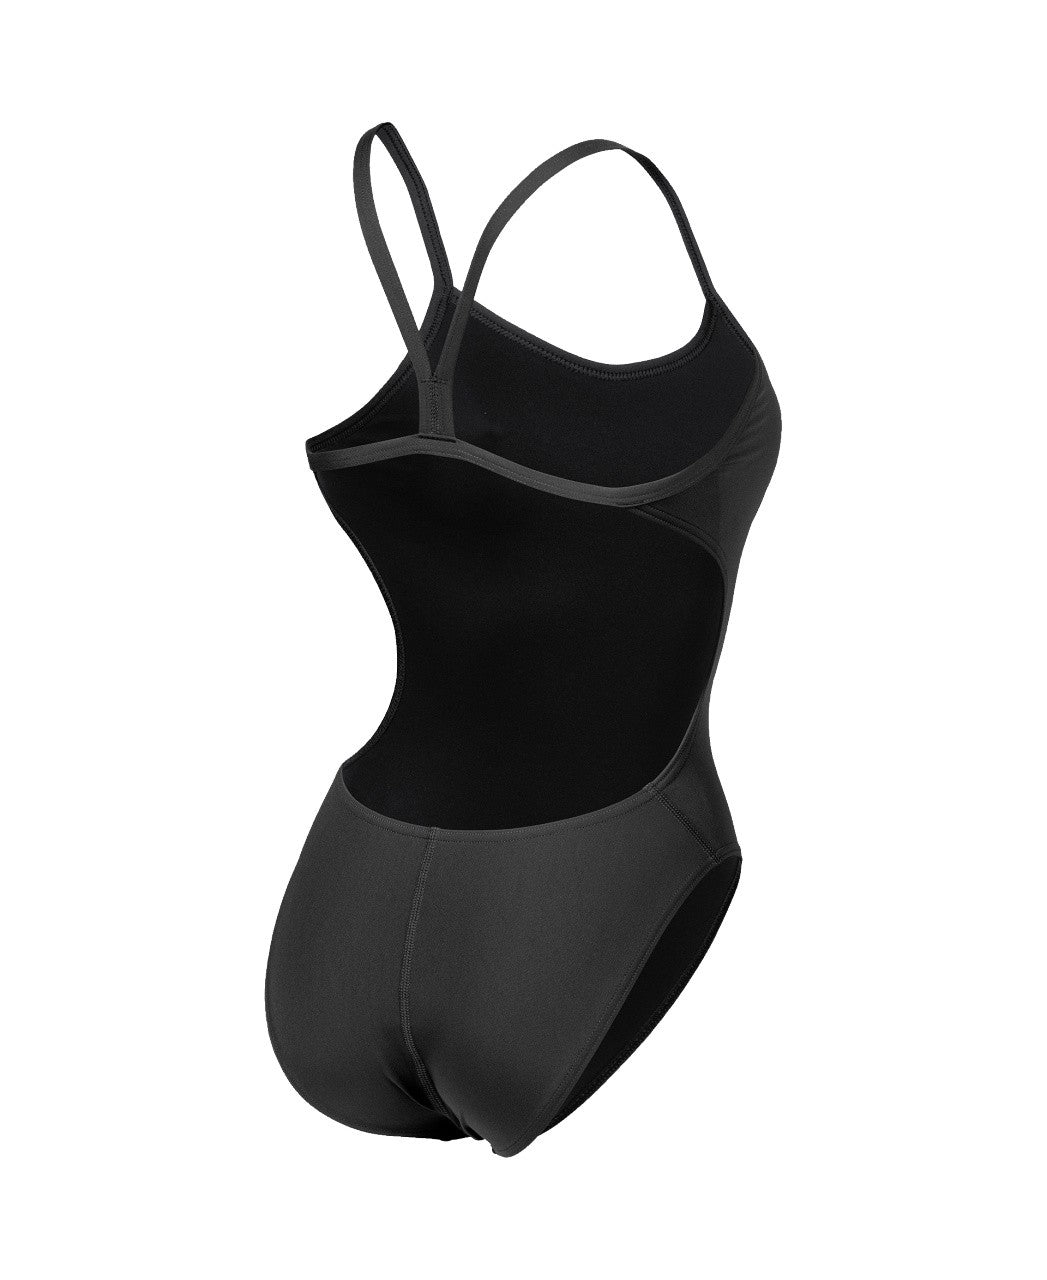 W Team Swimsuit Challenge Solid black-gold